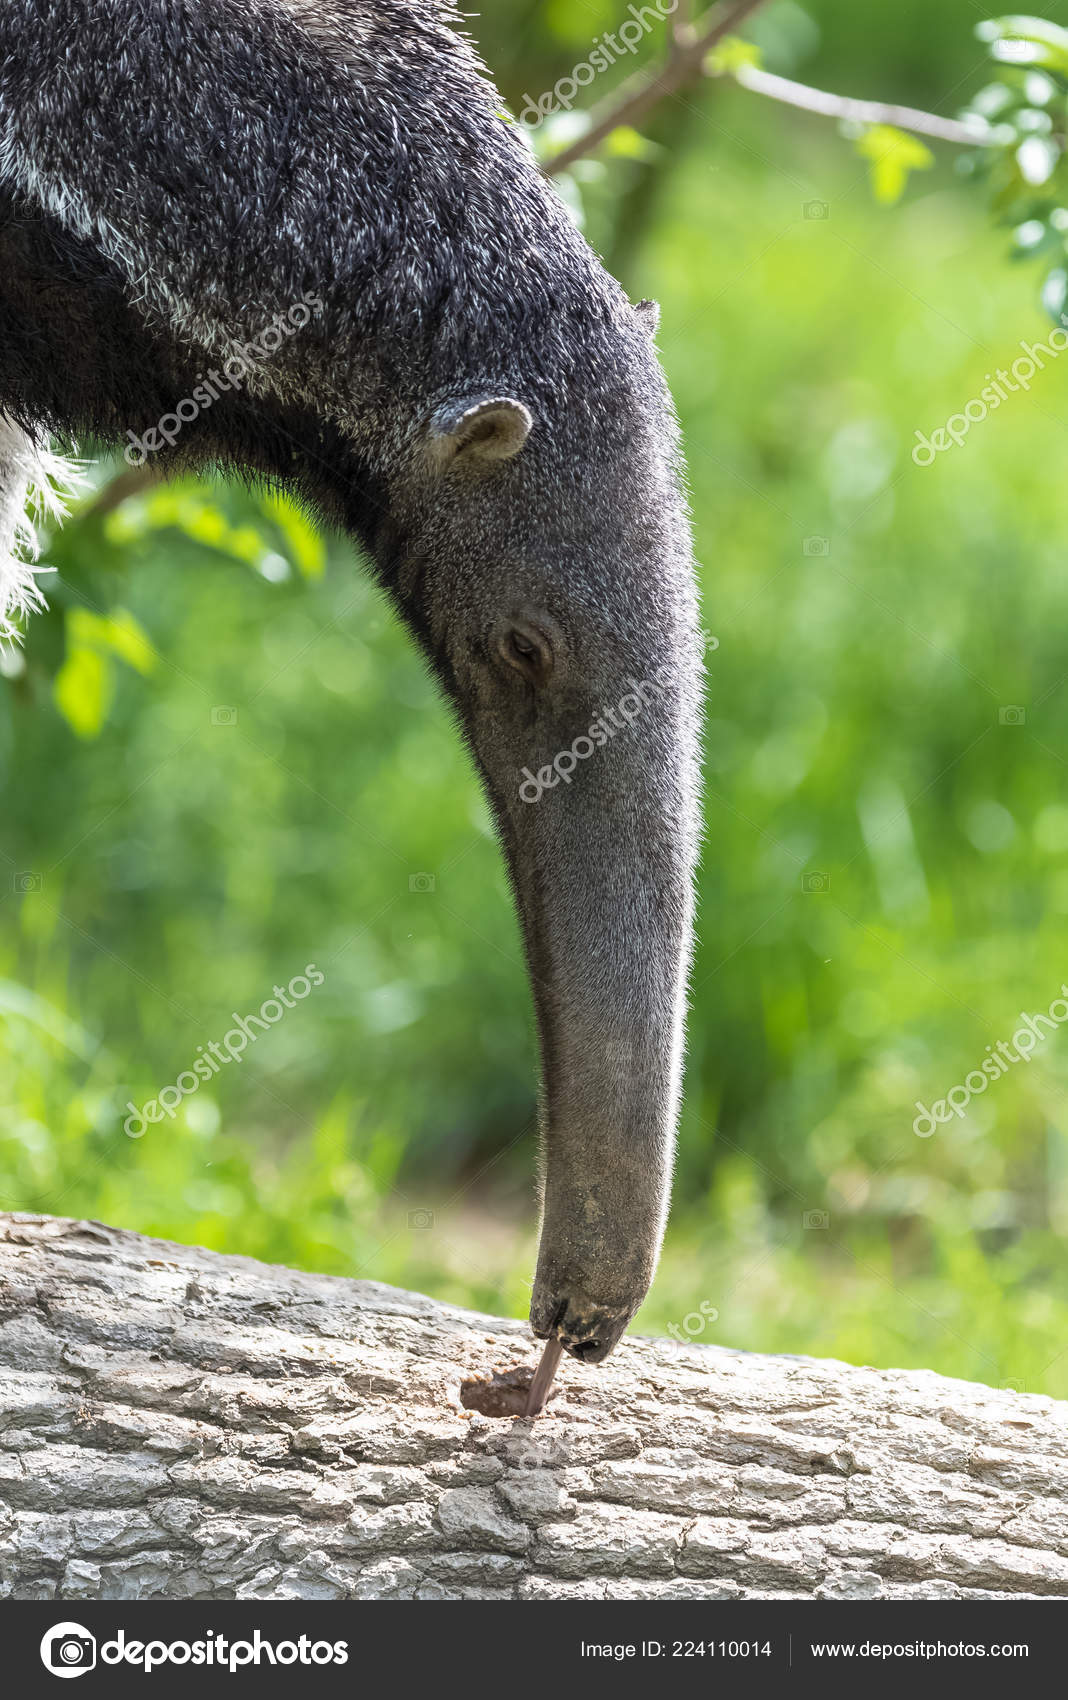 Giant Anteater Animal Eating Ants Tree Trunk Stock Photo by ©pascalegueret  224110014